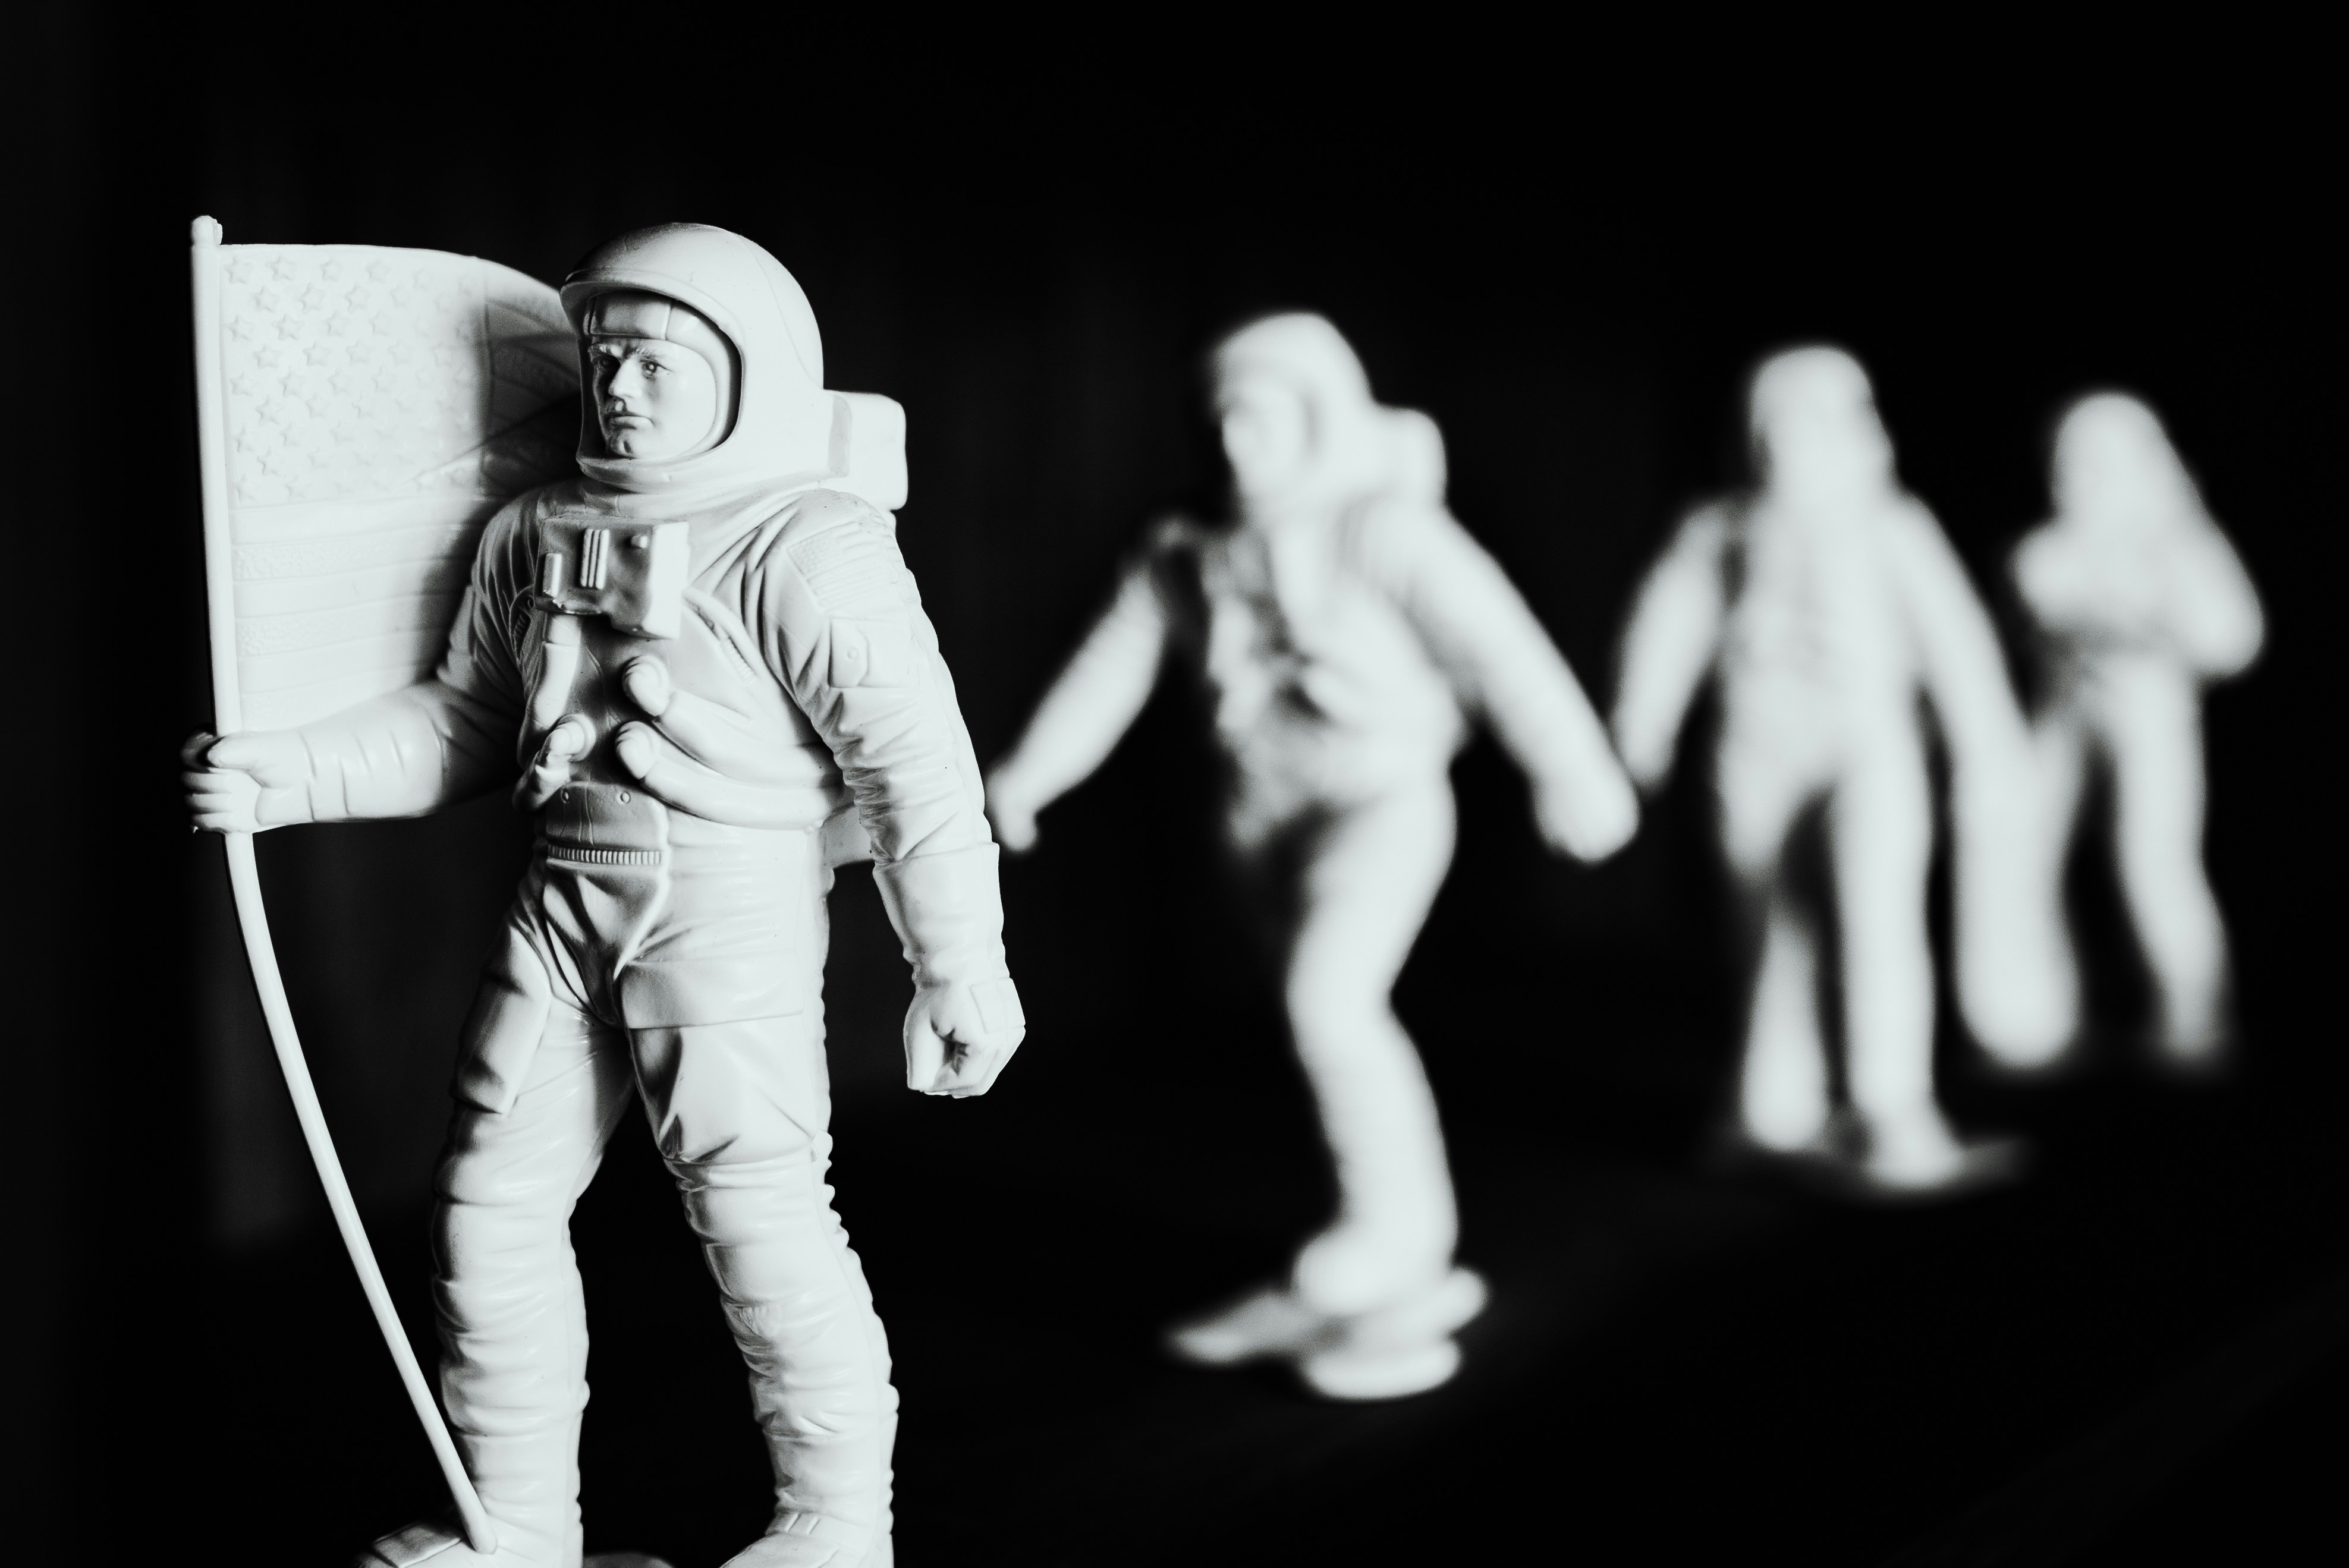 A row of astronaut figurines, the first carries a flag